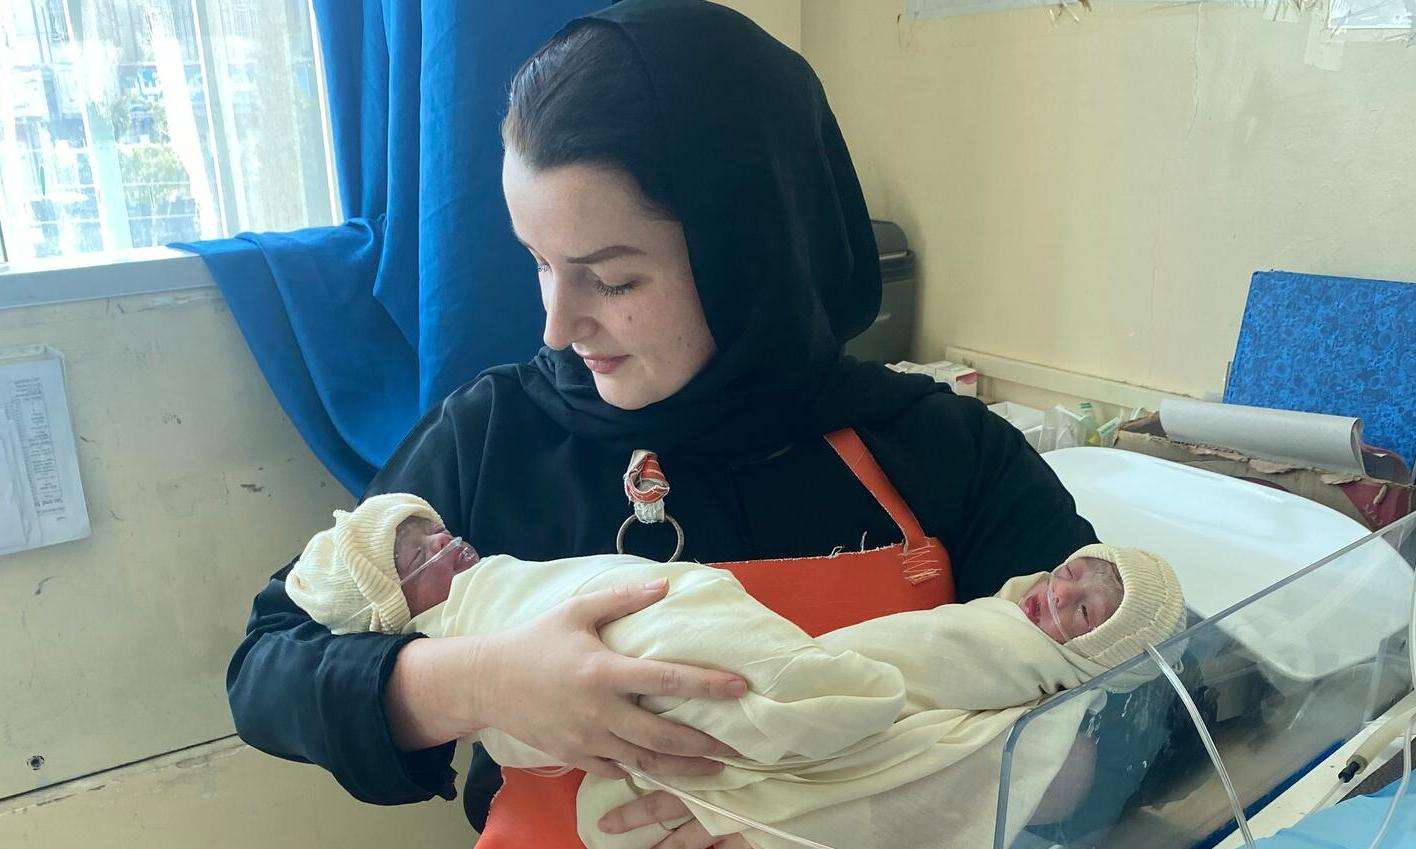 A woman in a head-covering and orange-ish uniform holds a small newborn wrapped in a blanket. 